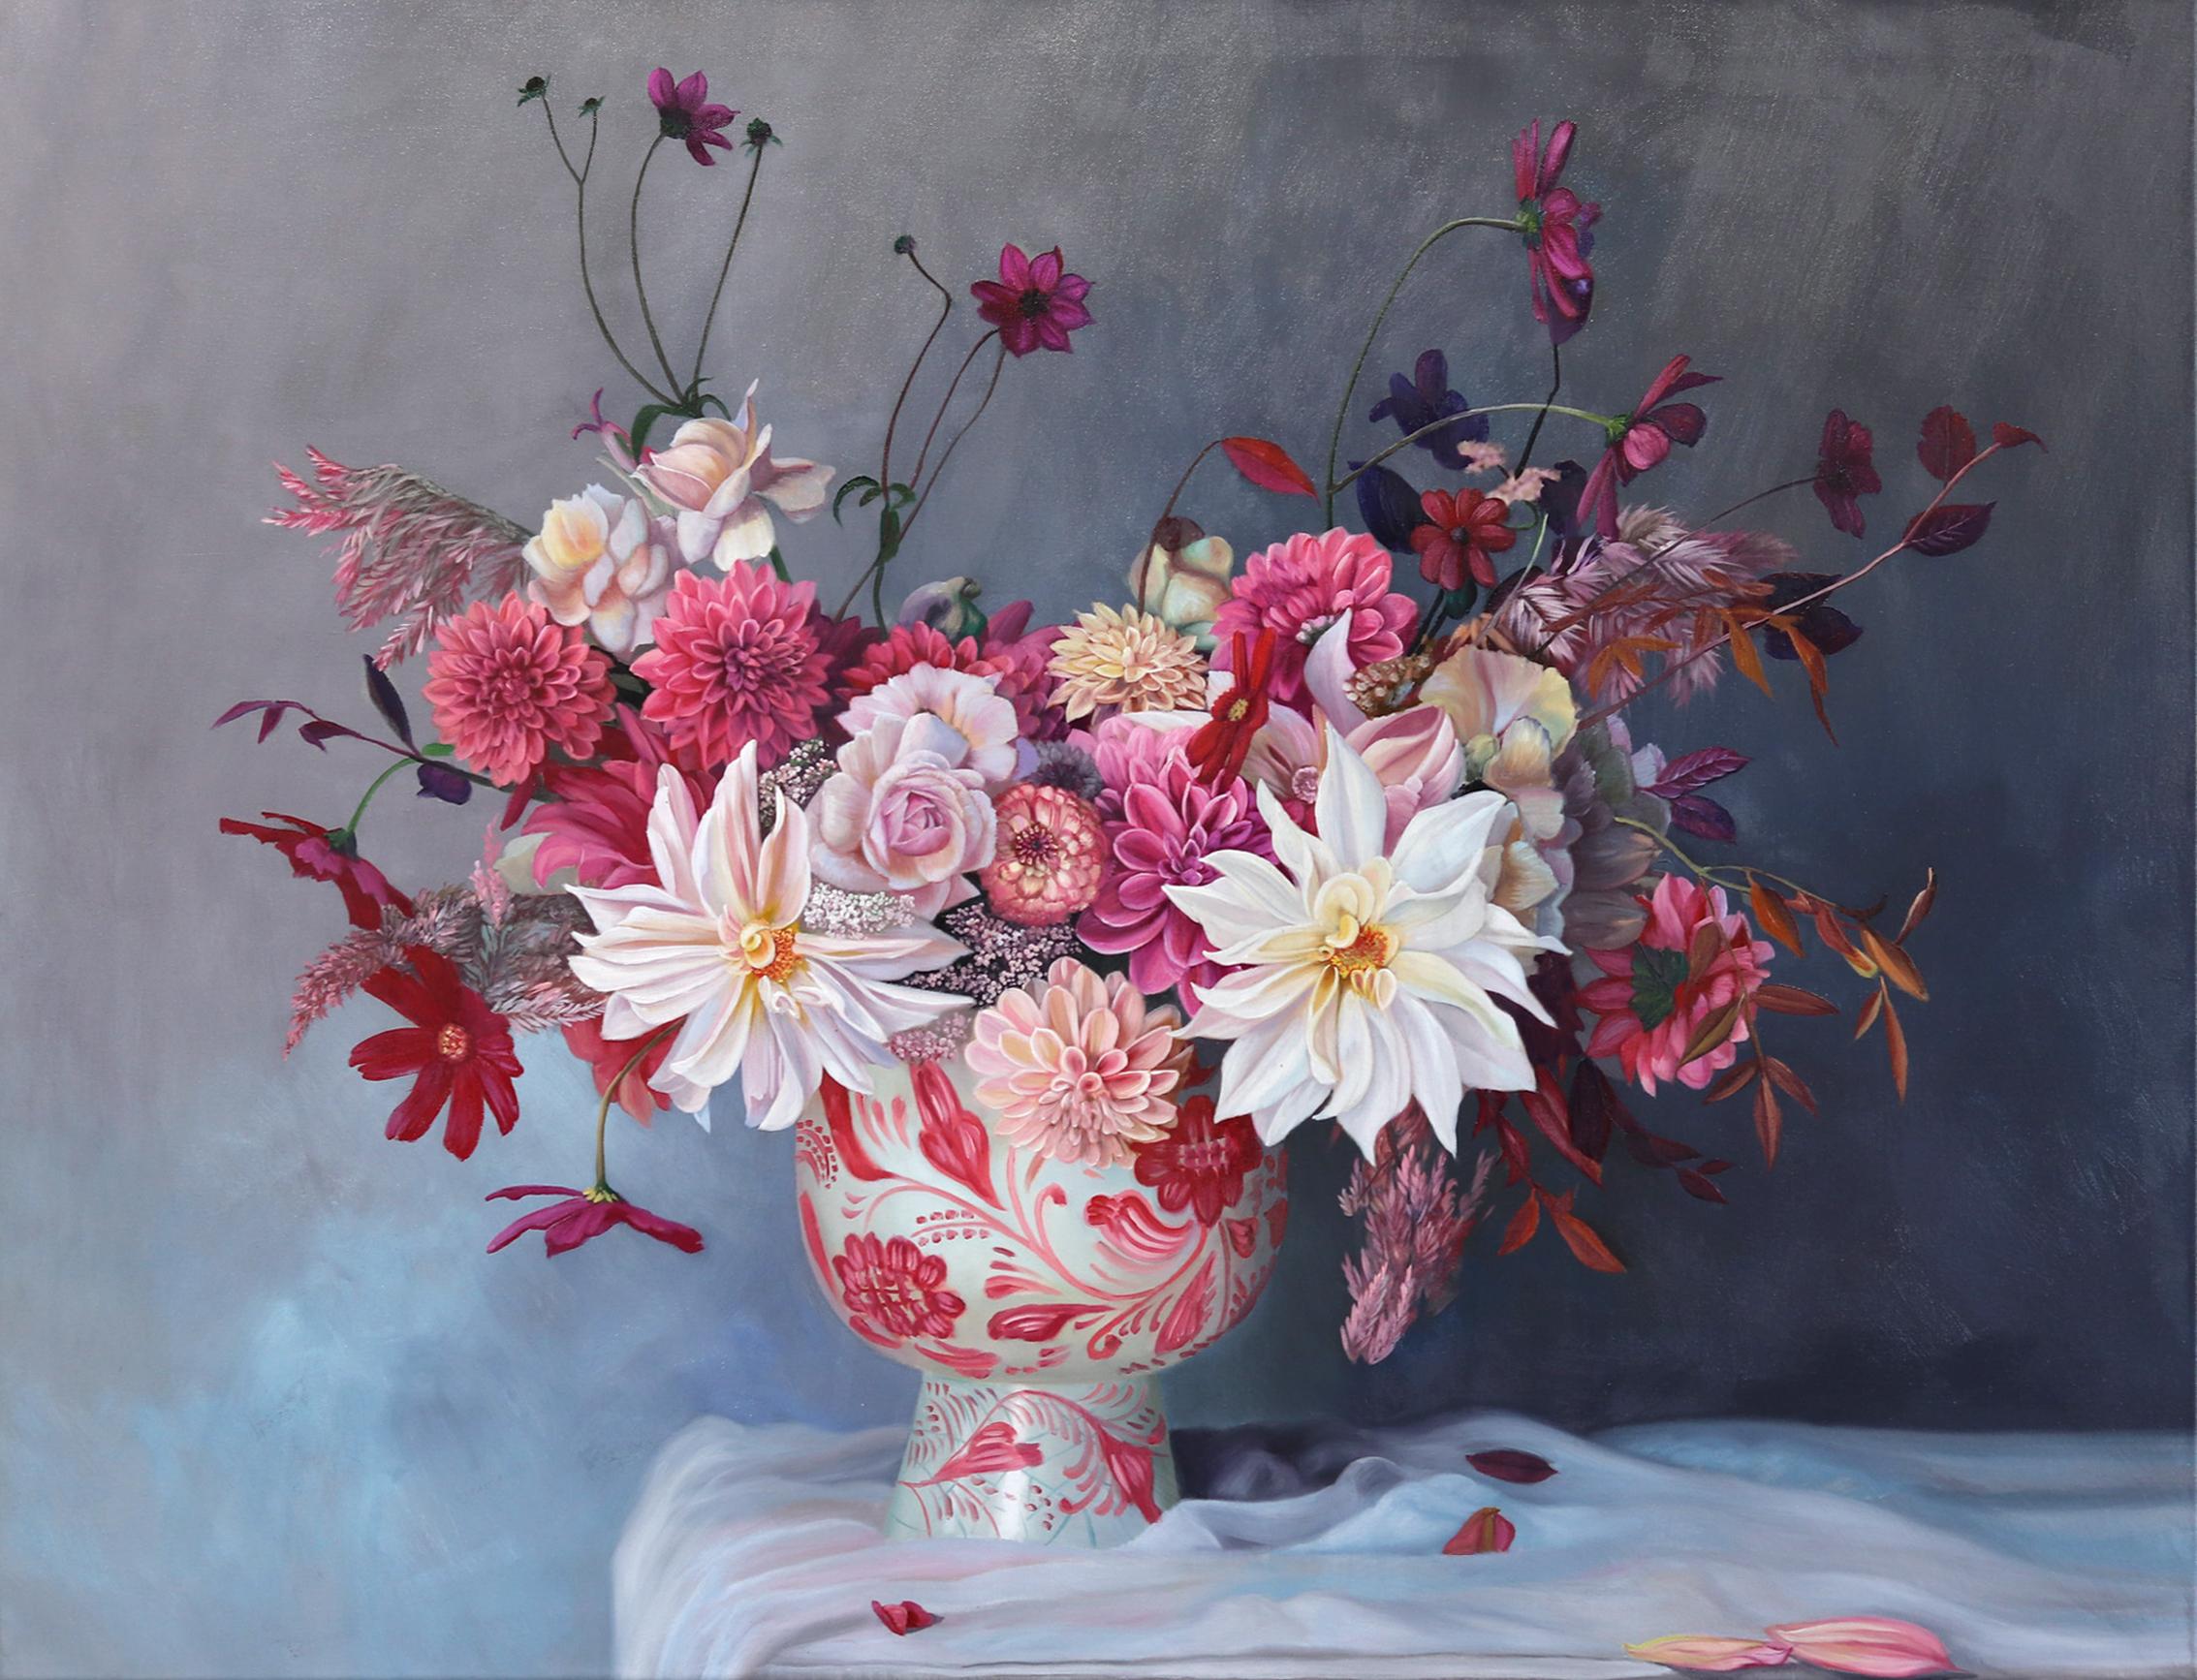 Katharina Husslein Figurative Painting - To Love And Be Loved - Still Life Floral Artwork Original Oil Painting